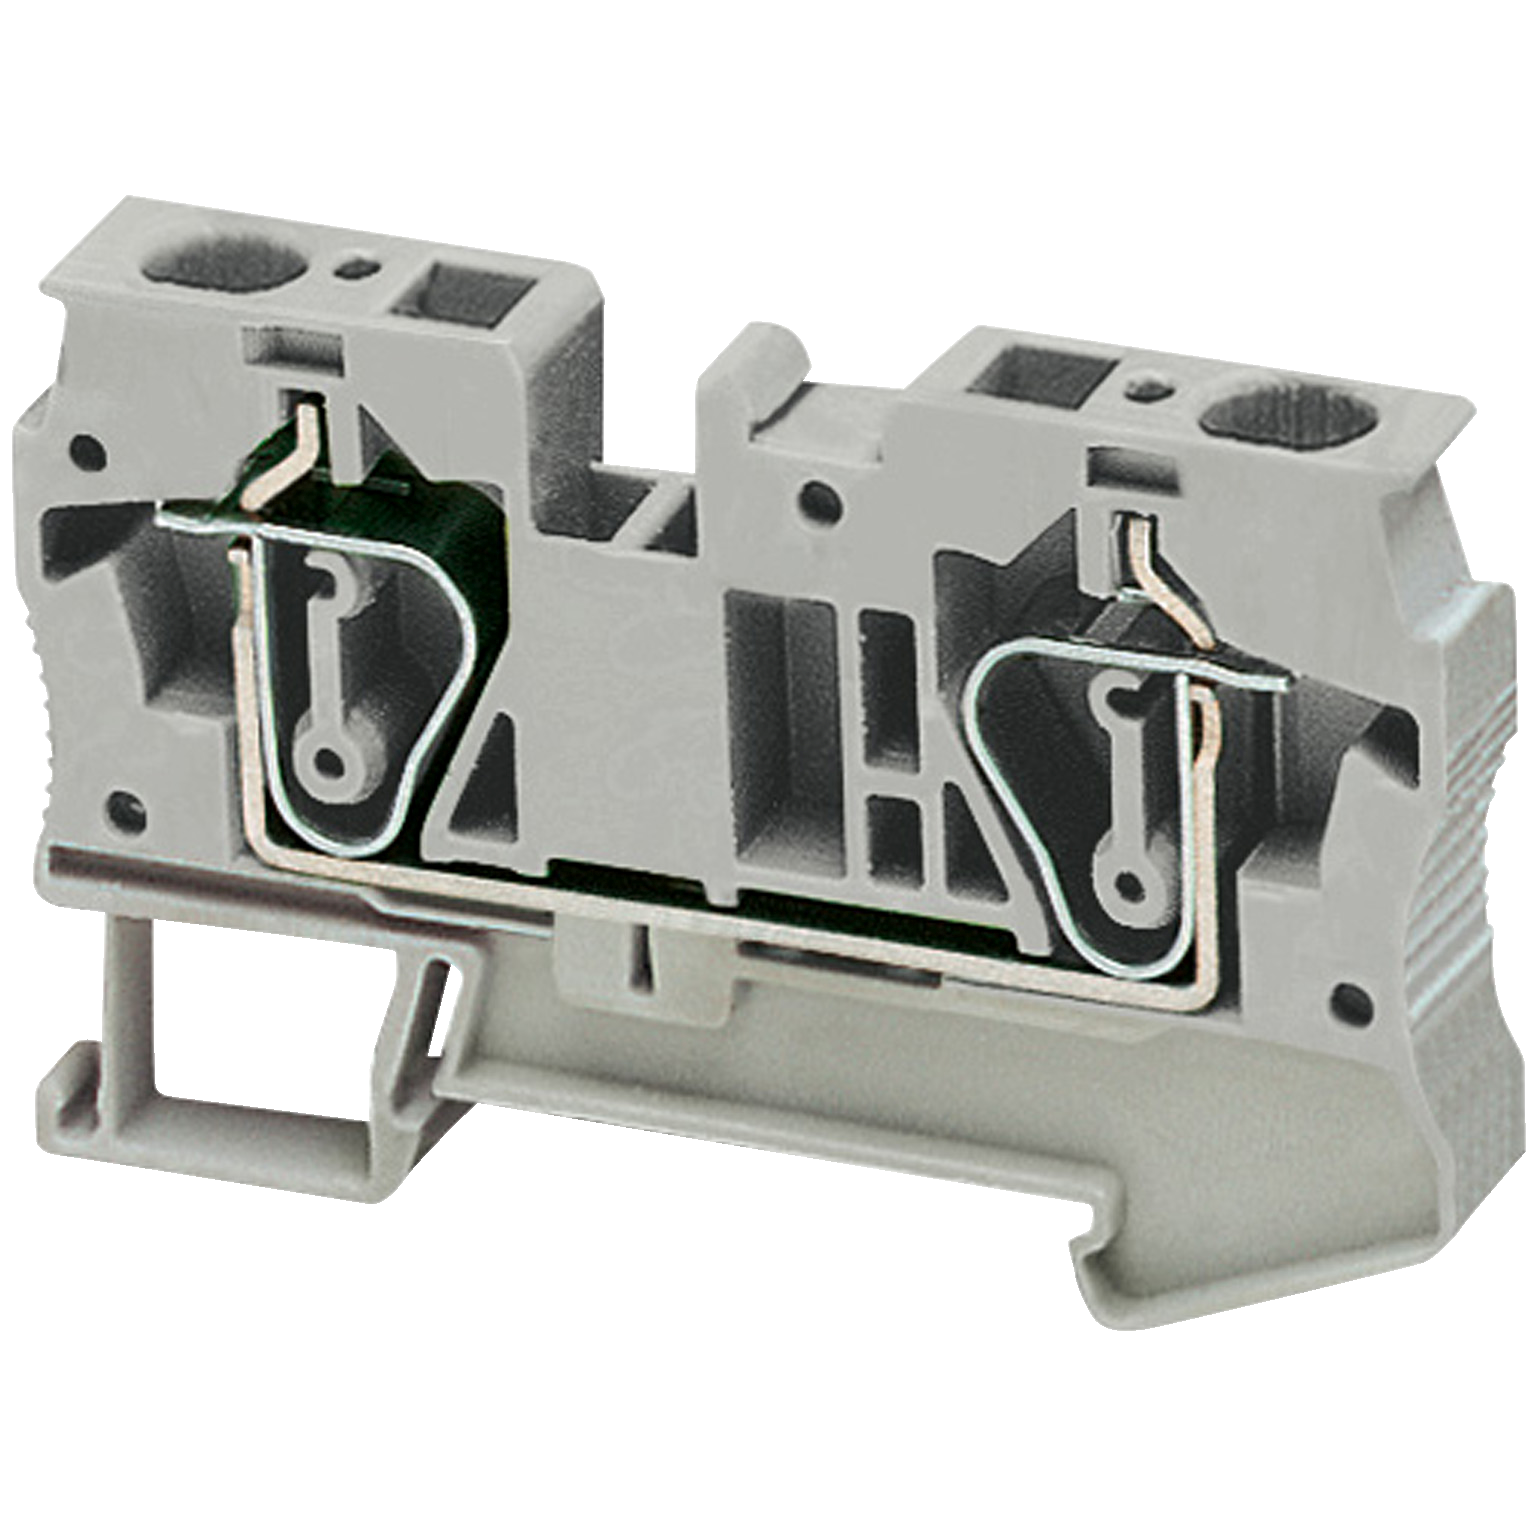 Terminal block, Linergy TR, spring type, feed through, 2 points, 6mm², grey, set of 50